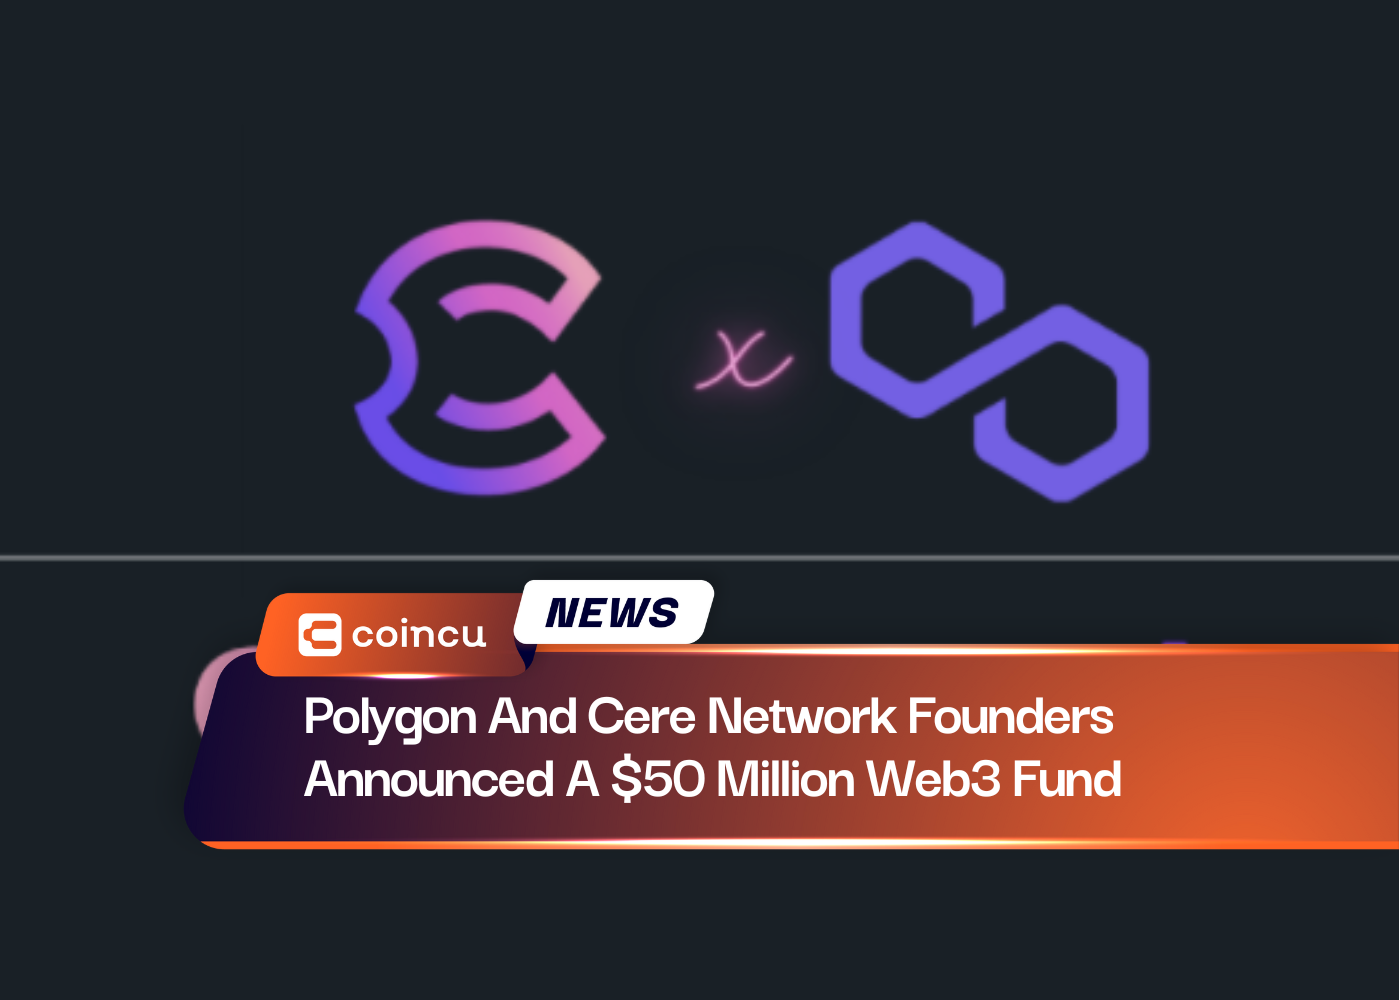 Polygon And Cere Network Founders Announced A $50 Million Web3 Fund